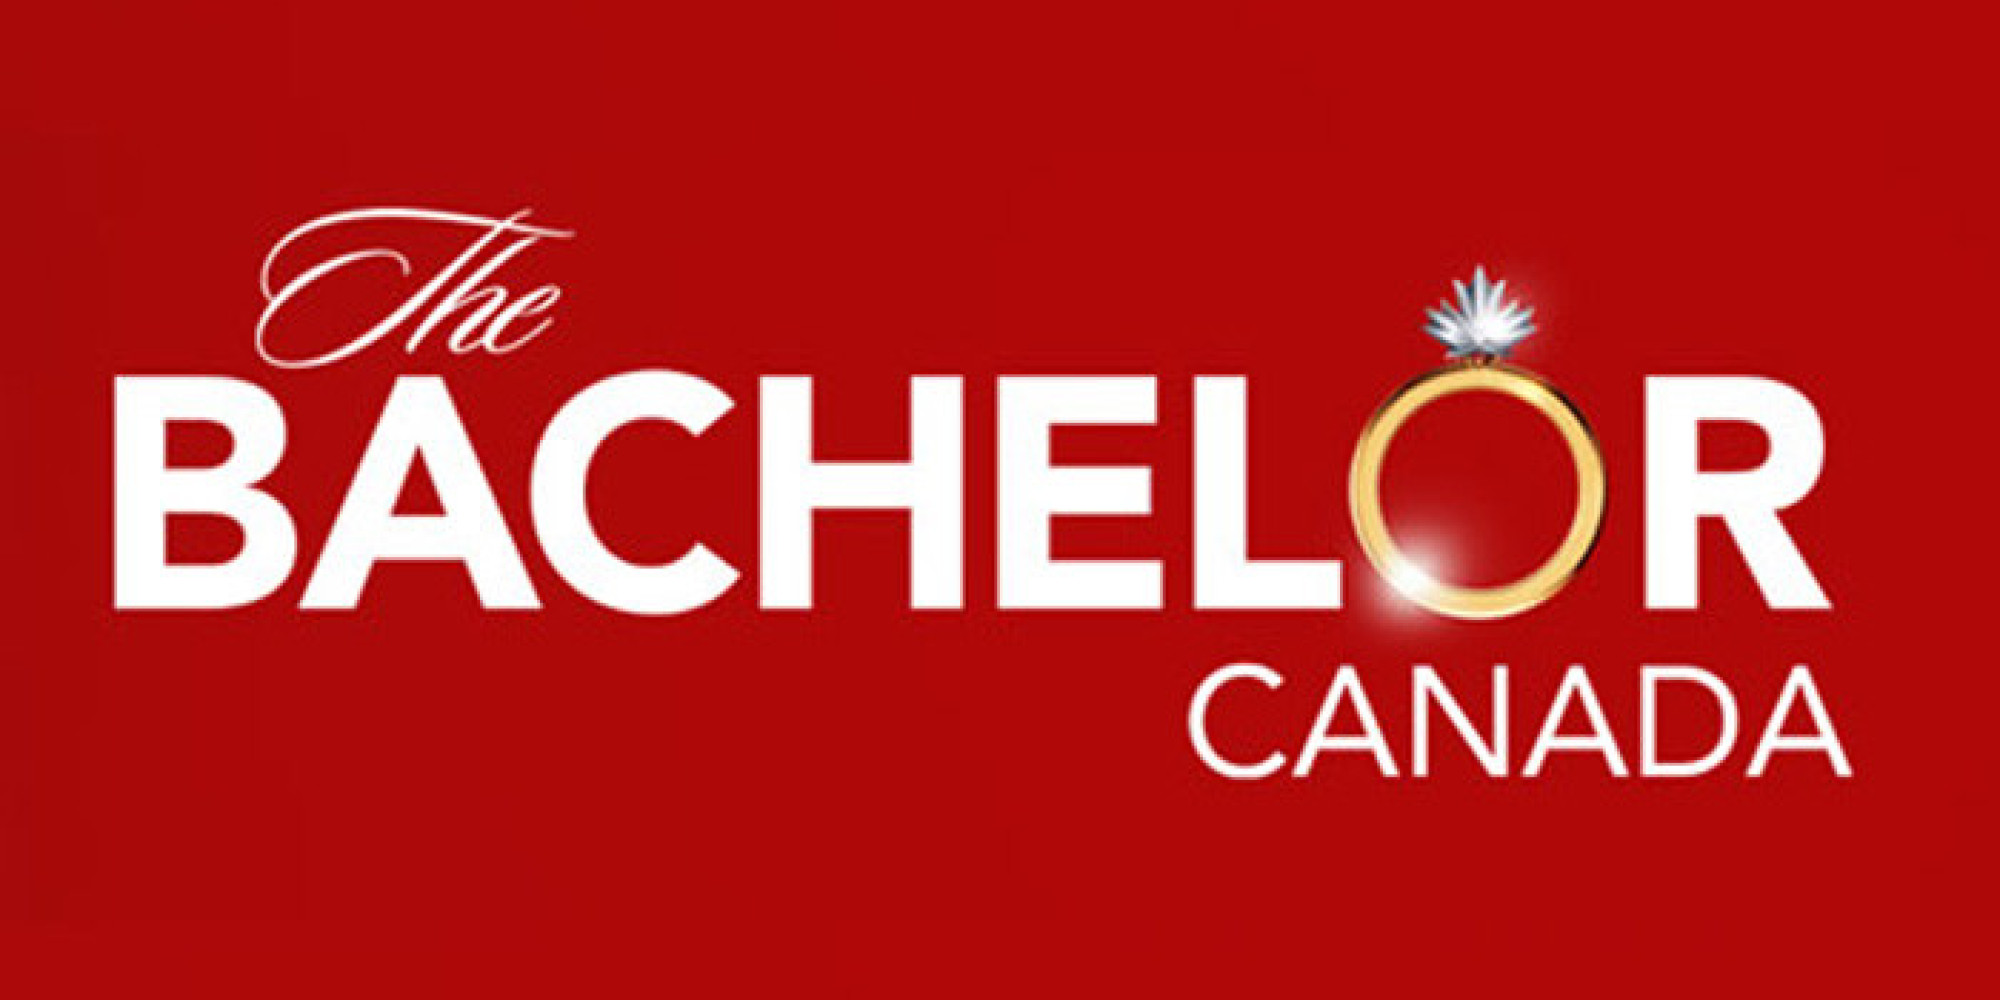 'The Bachelor Canada' Season 2 Everything You Need To Know